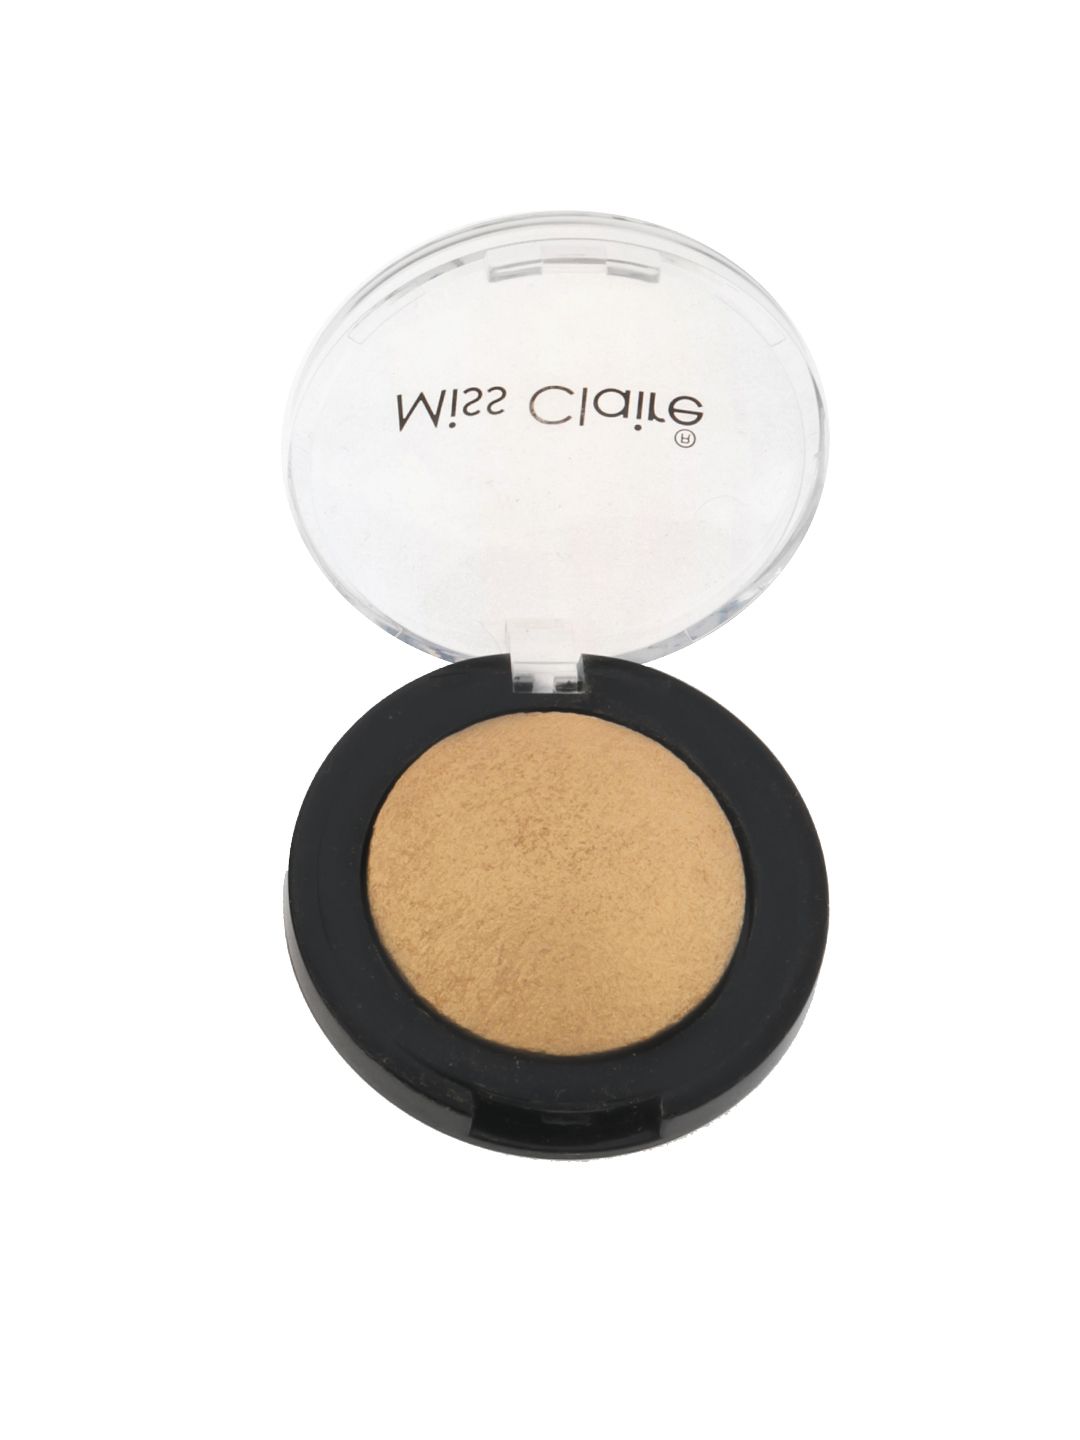 Miss Claire 01 Baked Eyeshadow 3.5 g Price in India